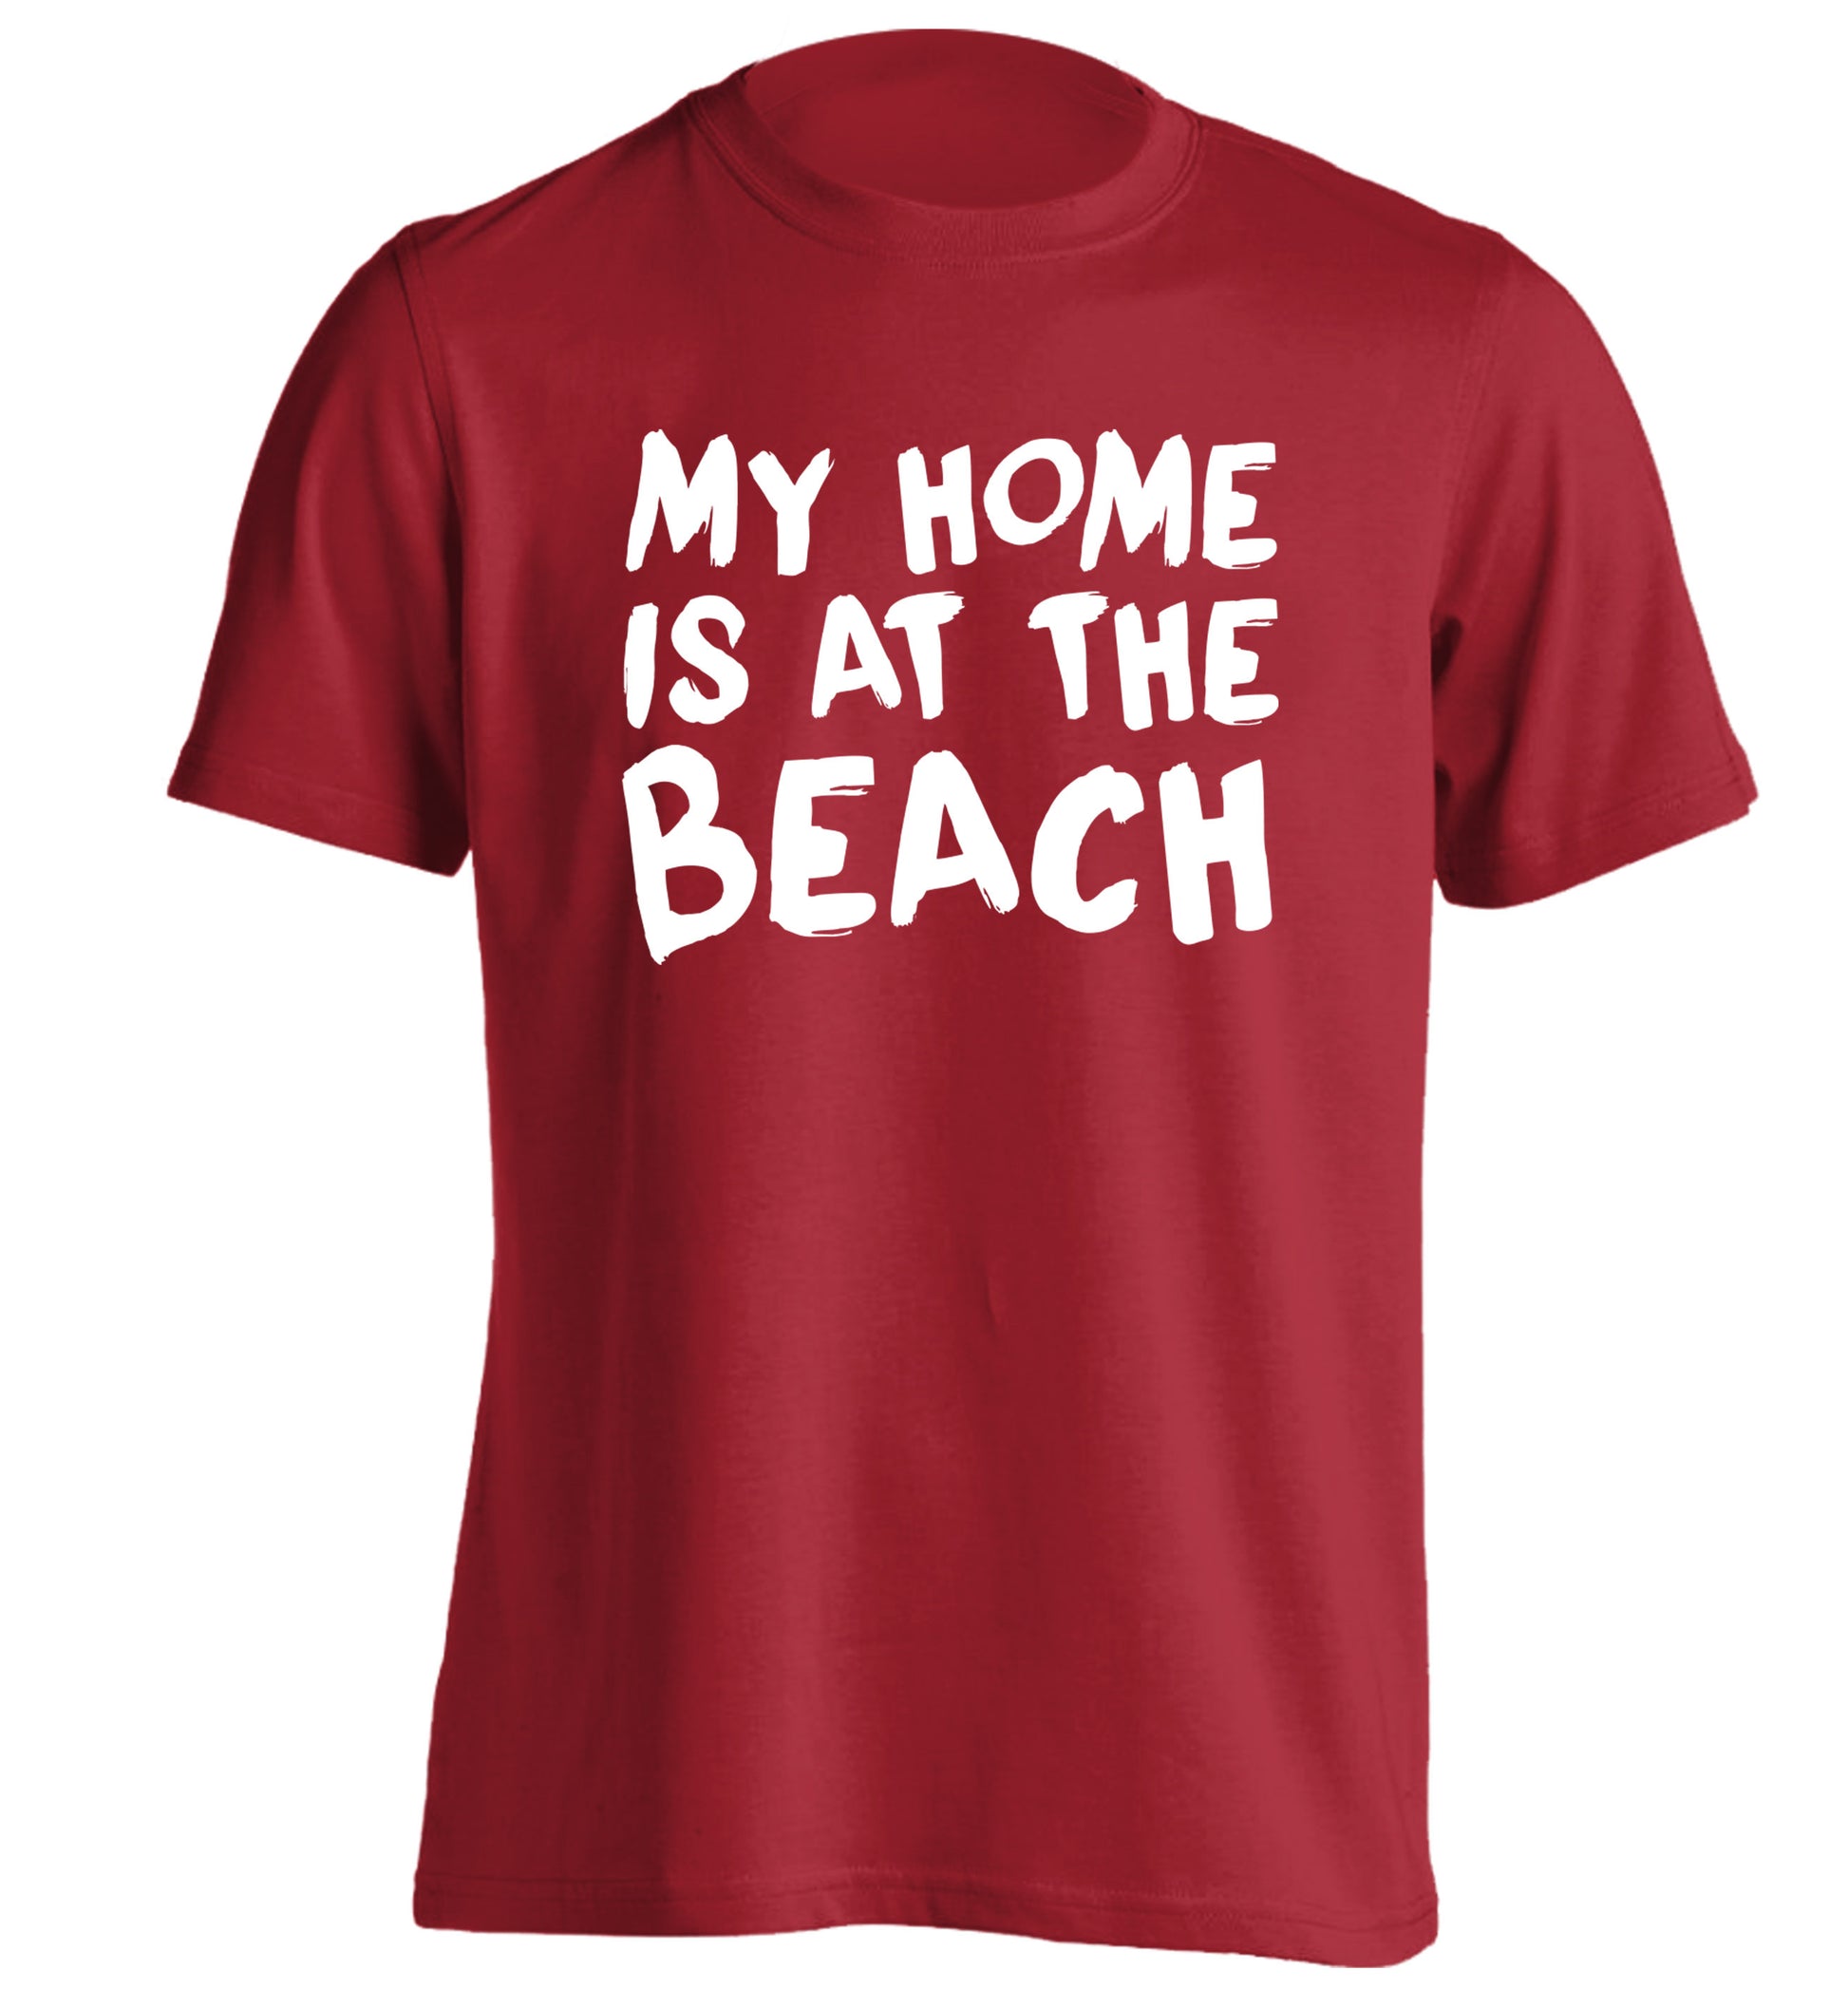 My home is at the beach adults unisex red Tshirt 2XL